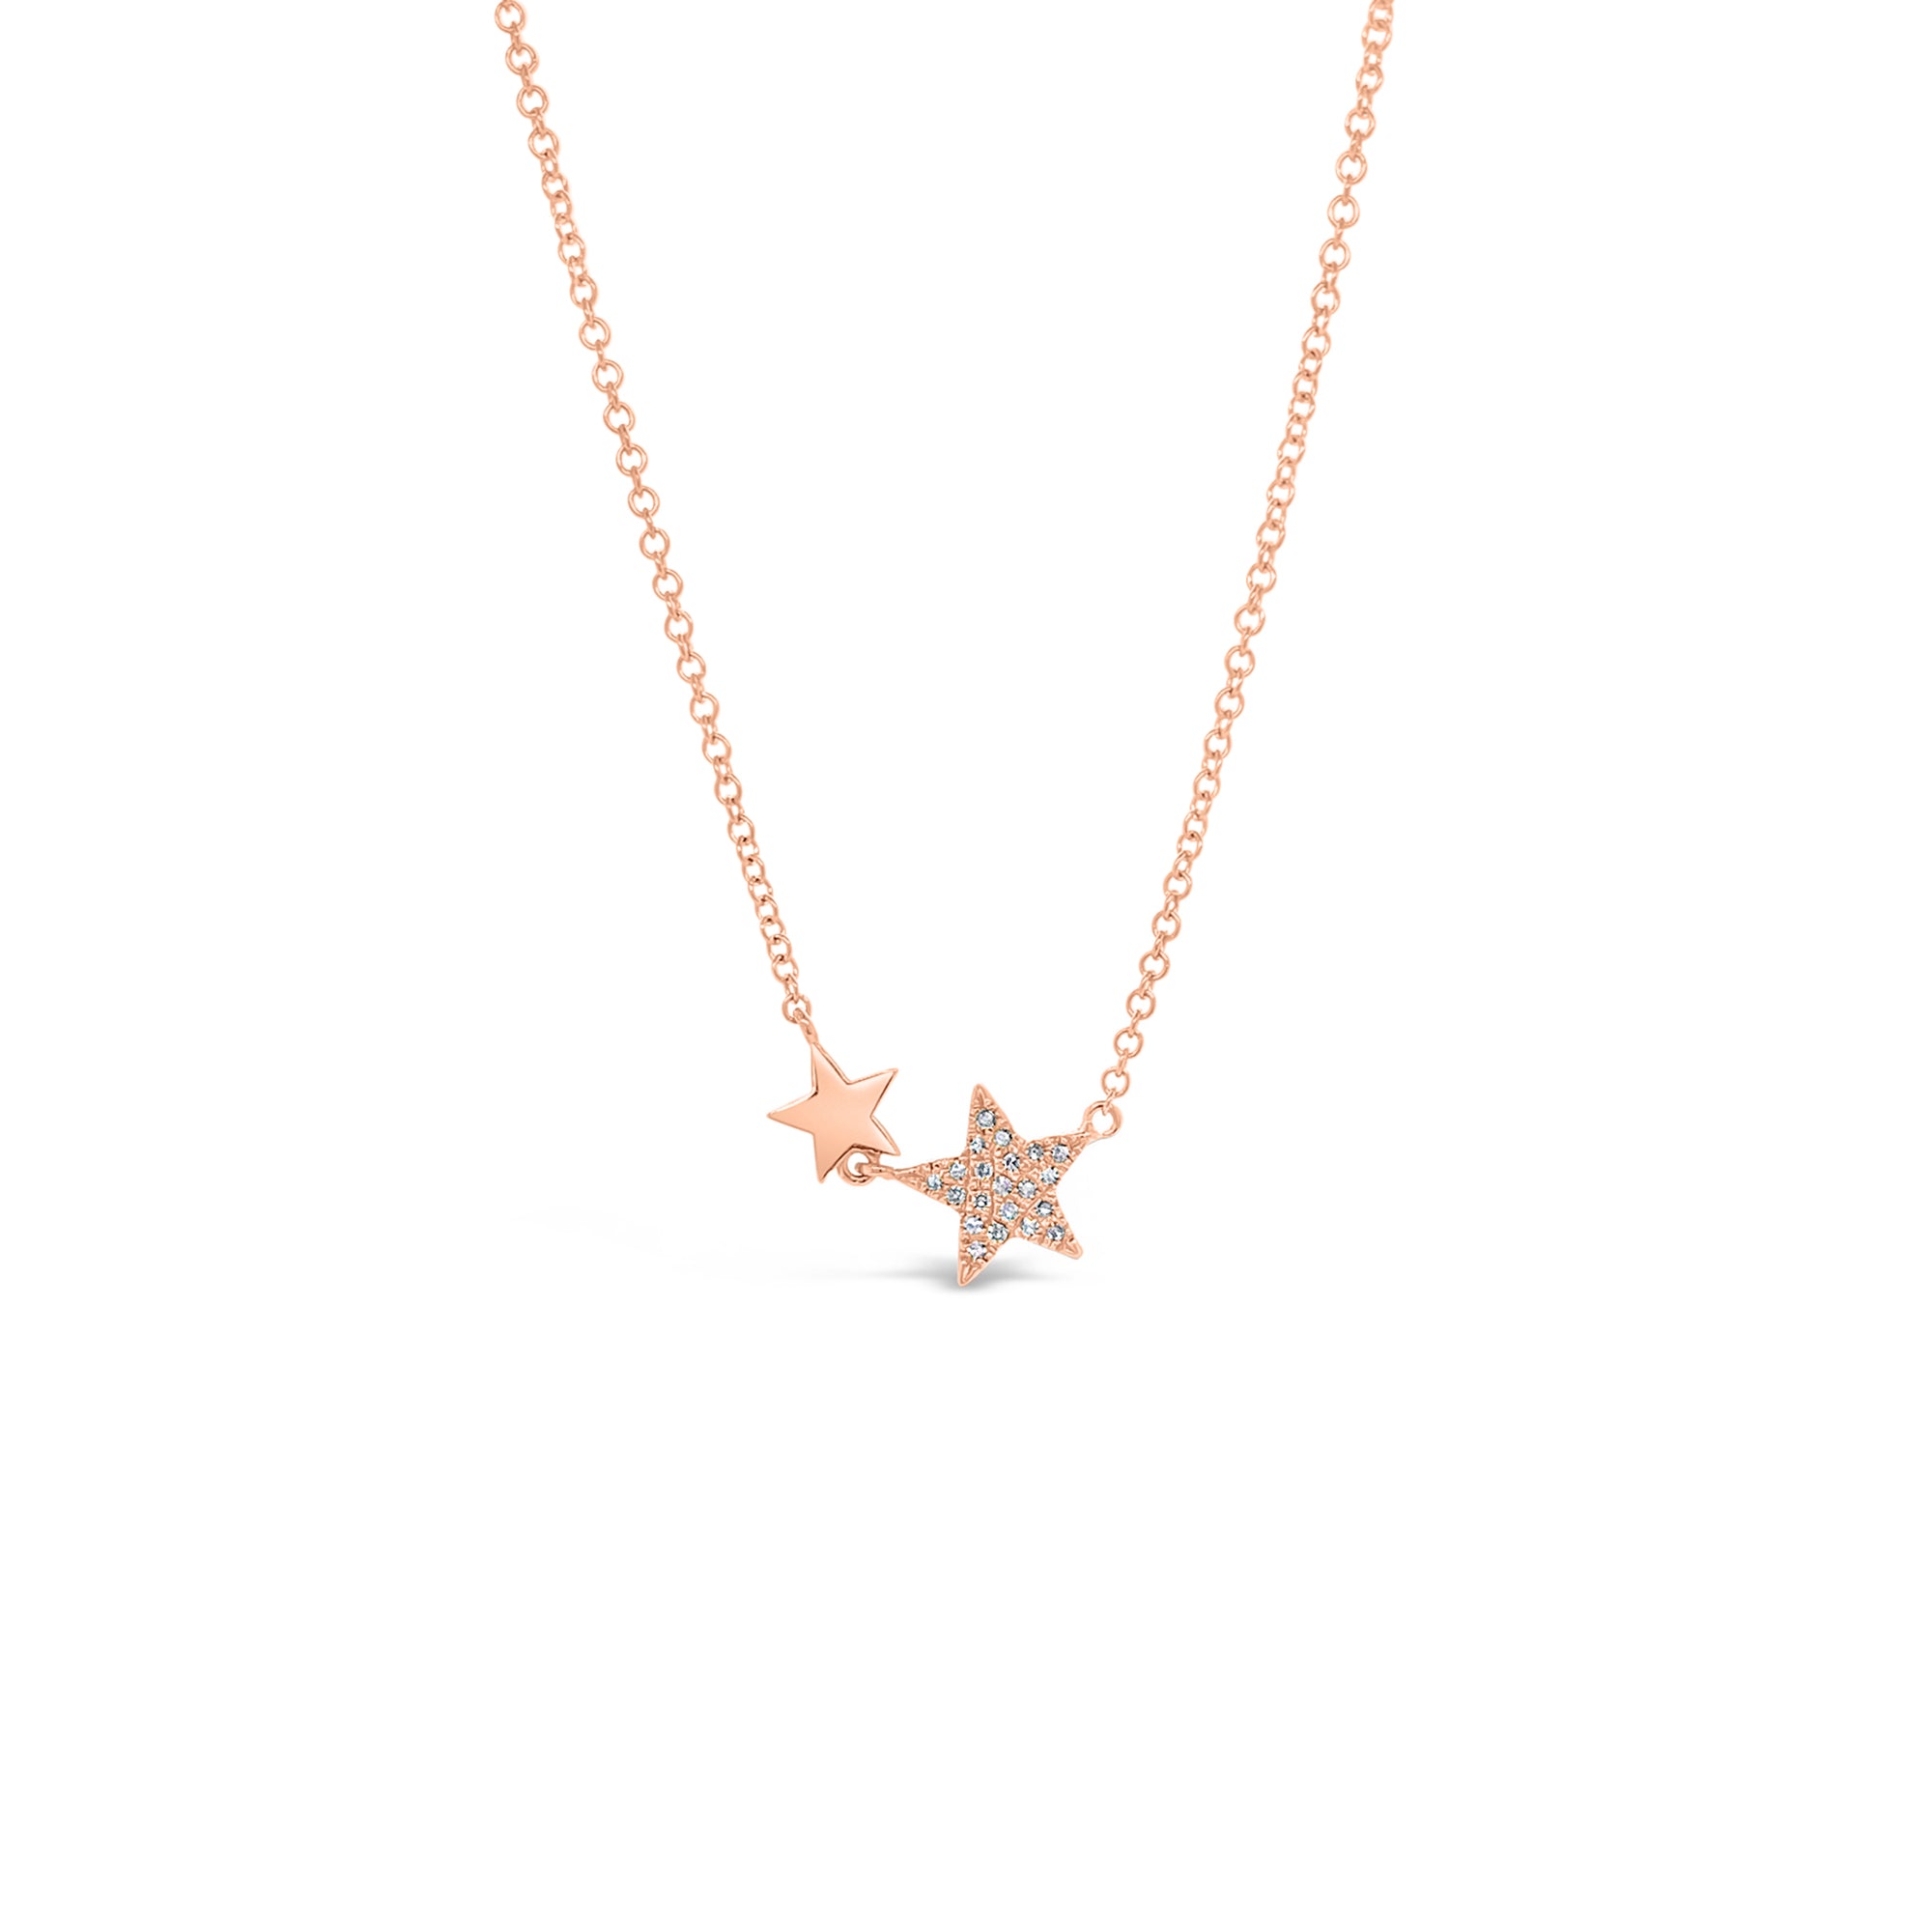 Diamond Double Star Necklace  - 14K gold weighing 1.82 grams  - 21 round diamonds totaling 0.05 carats